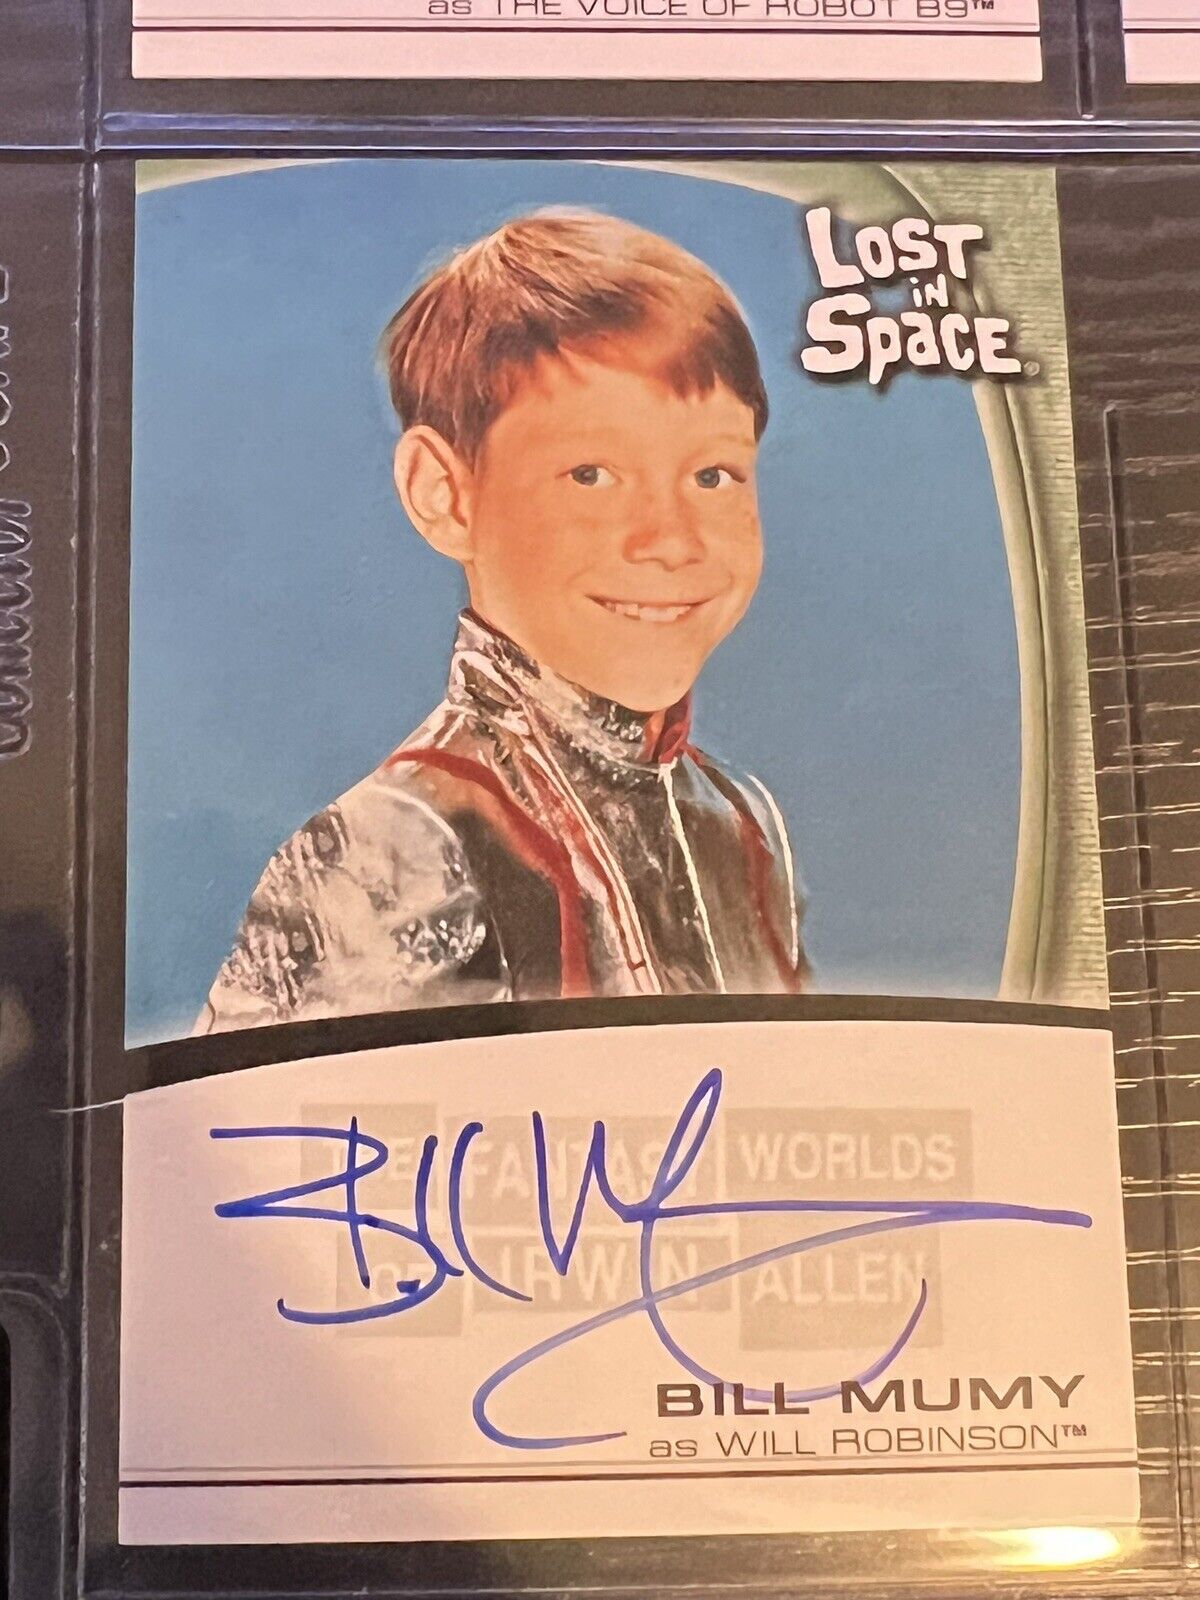 Lost in Space Origional Series Bill Mumy as Will Robinson Autograph Card